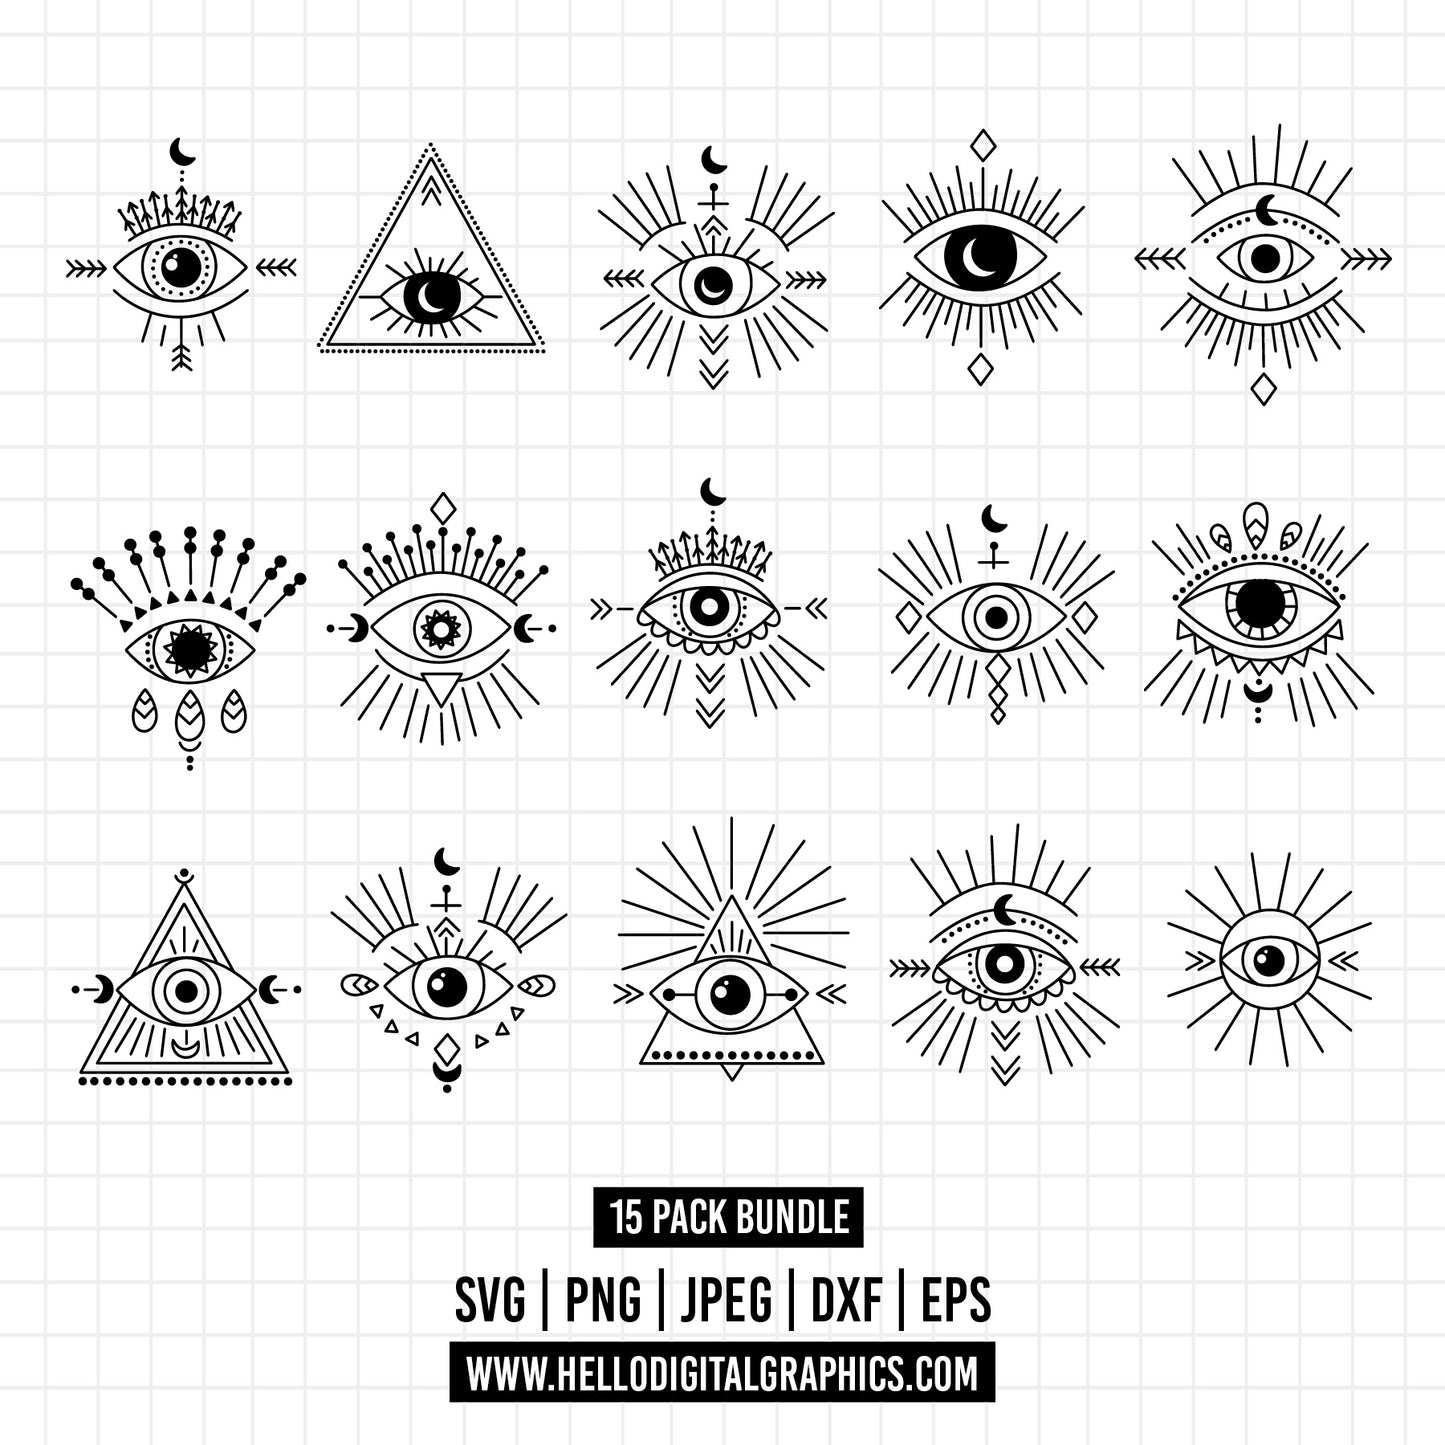 COD1293- Mystical eye clipart Evil eye png mystical png third eye png Masonic clipart All seeing eye tattoo style witchy aesthetic print on demand